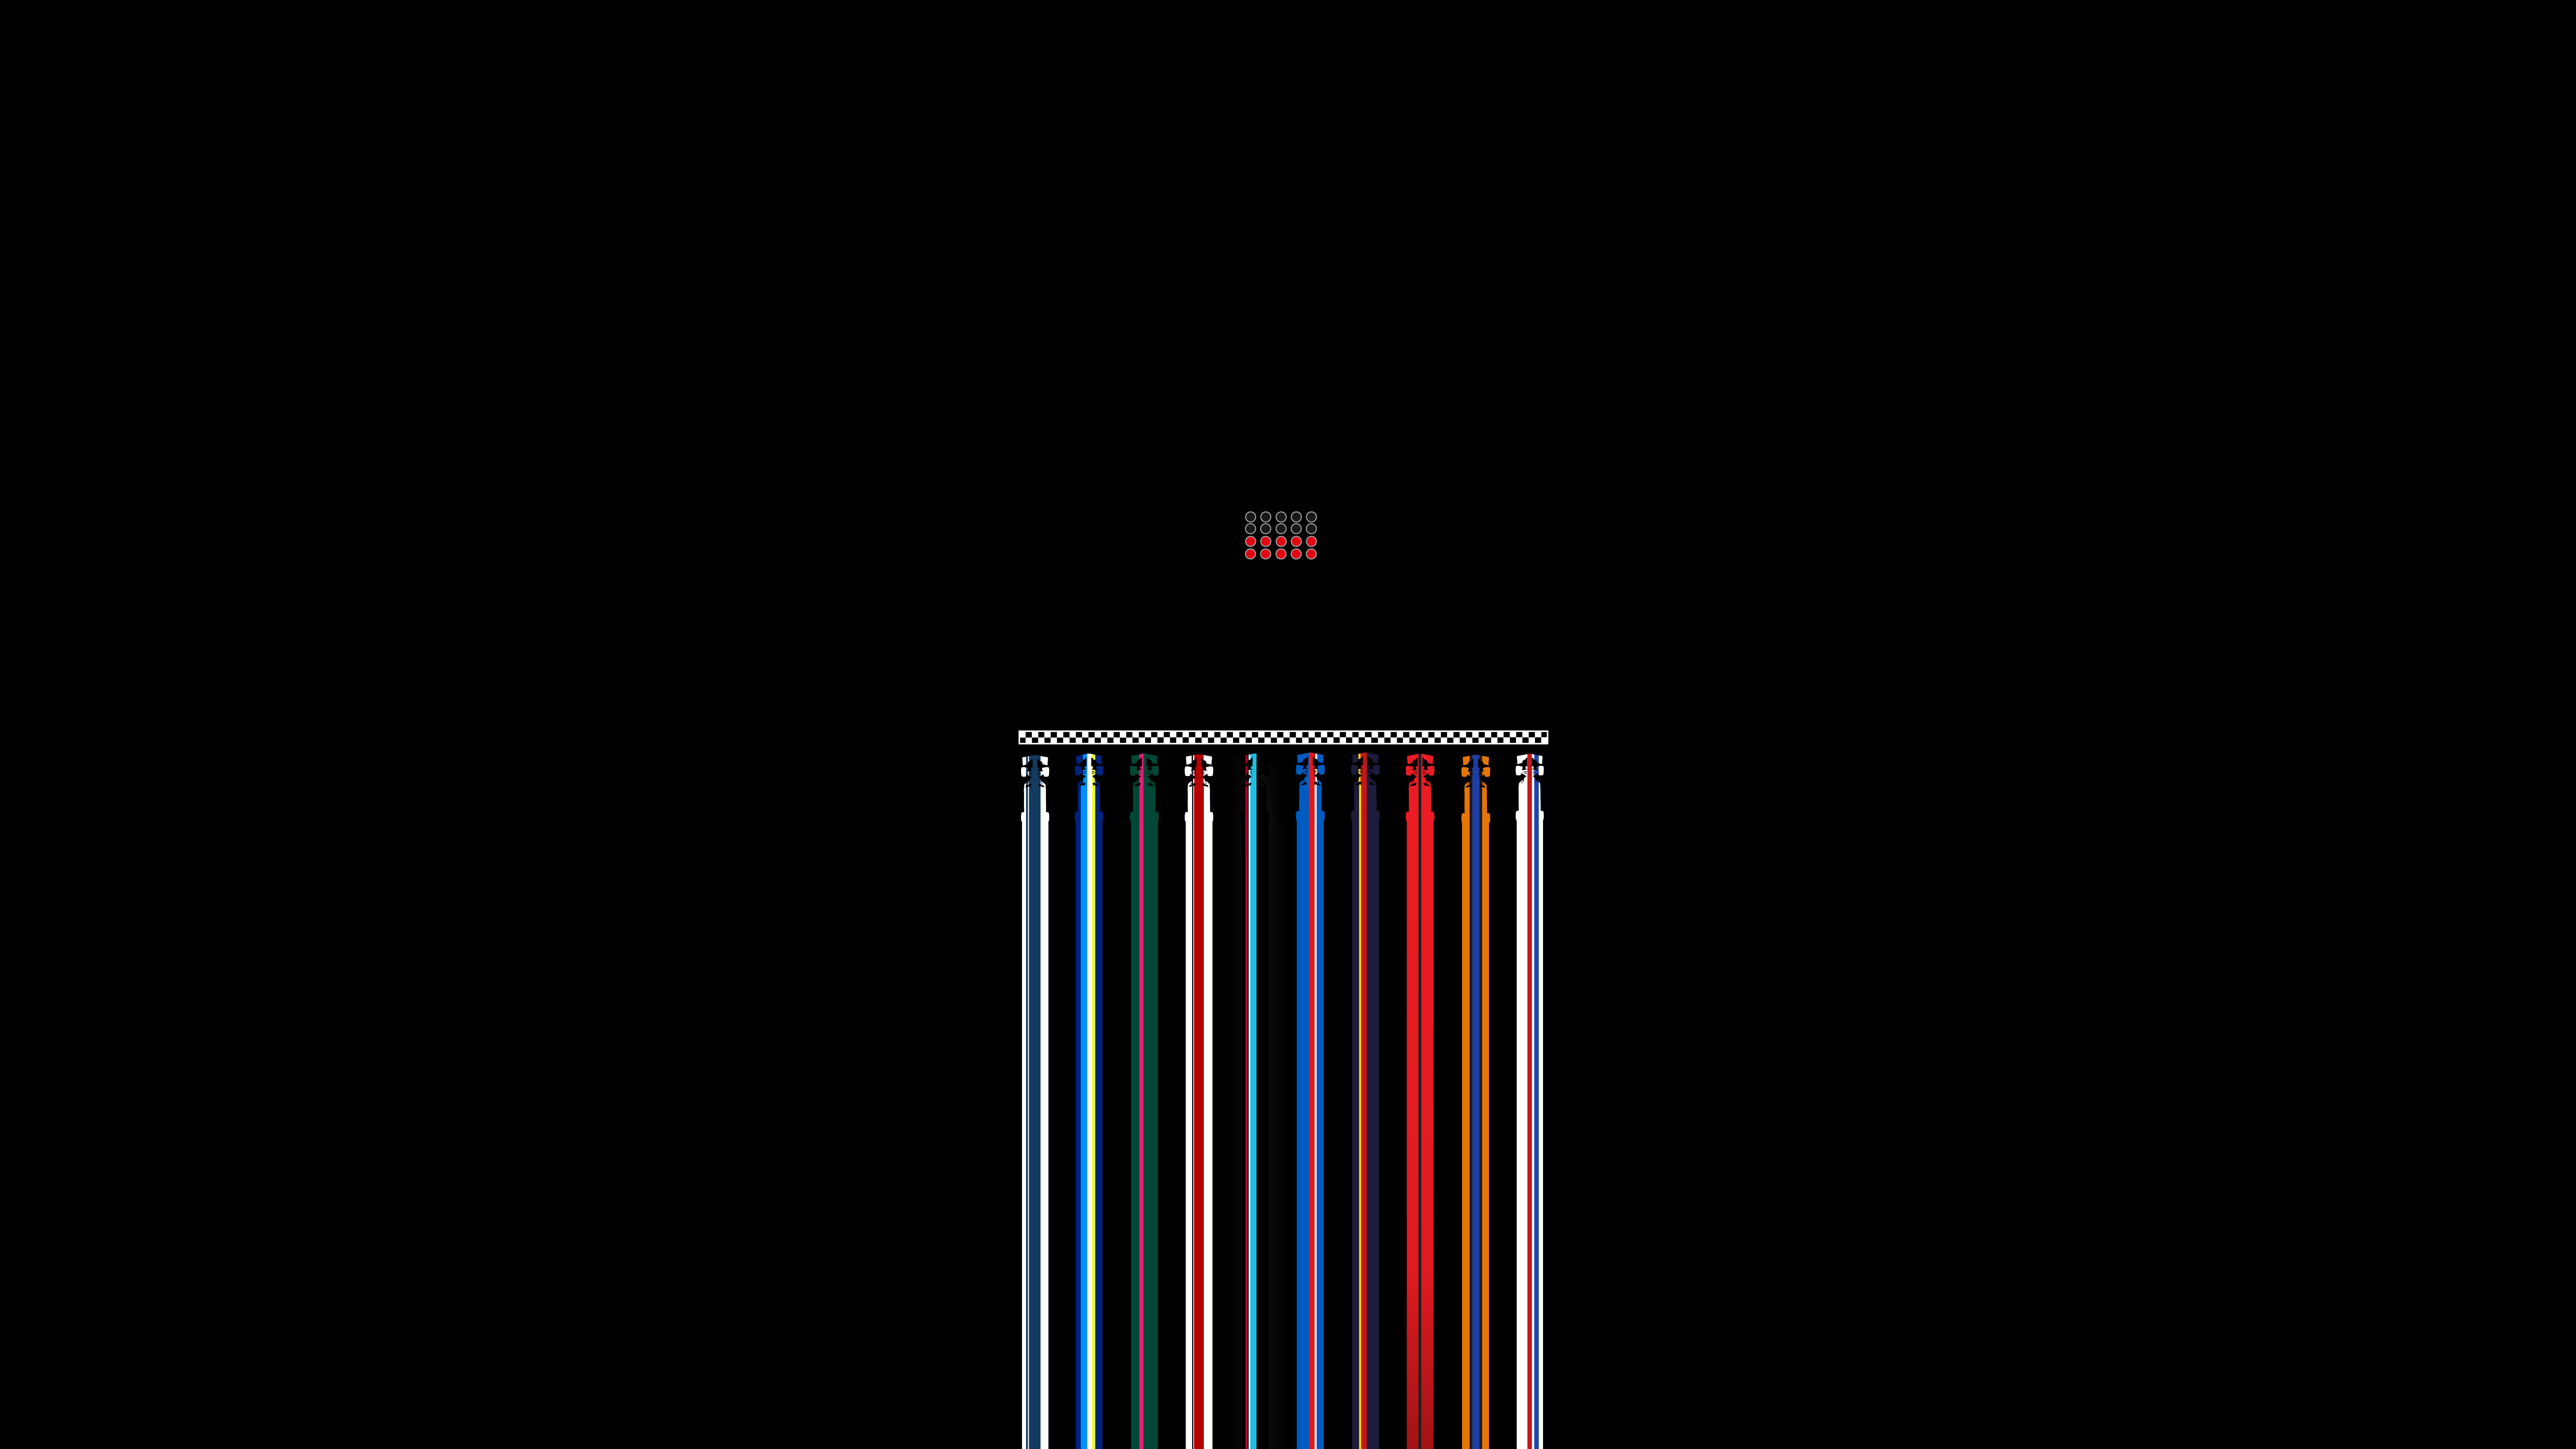 OC Minimalist Grid Wallpaper 2021 (Tall versions and variations in comments): formula1